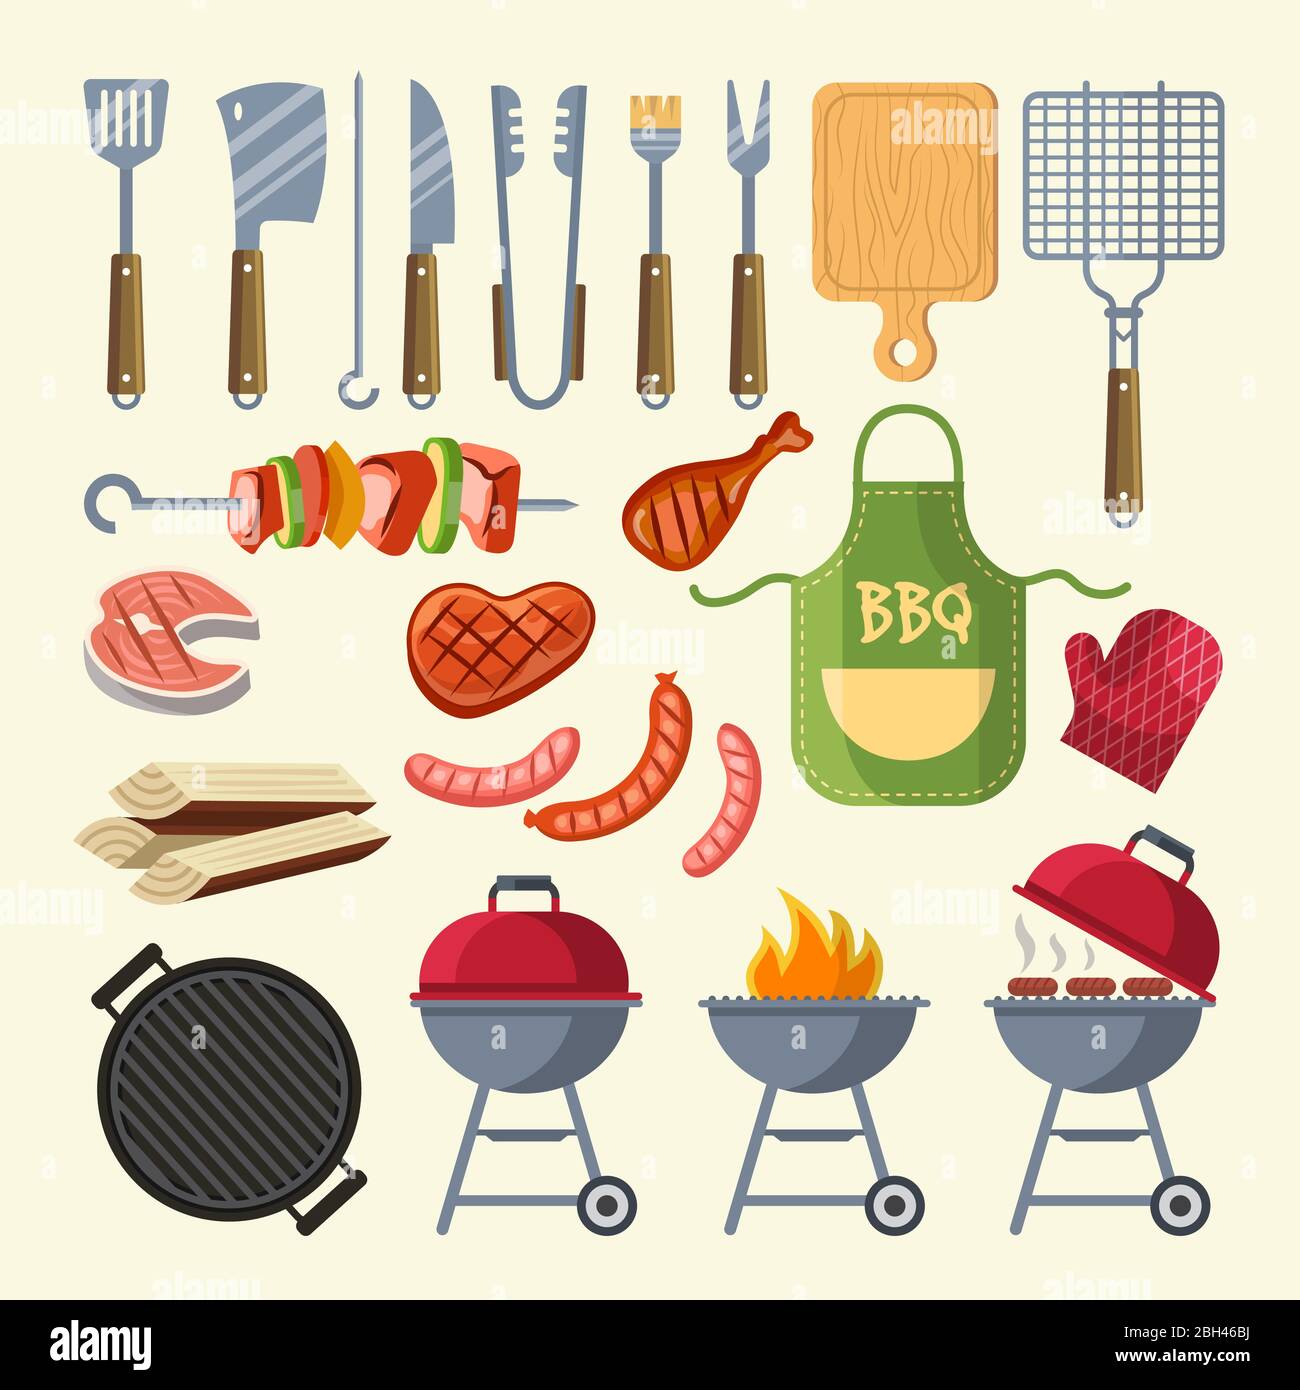 https://c8.alamy.com/comp/2BH46BJ/vector-cartoon-illustration-of-meat-sauce-grill-and-other-elements-for-bbq-party-grill-barbecue-food-meat-bbq-steak-grilled-2BH46BJ.jpg